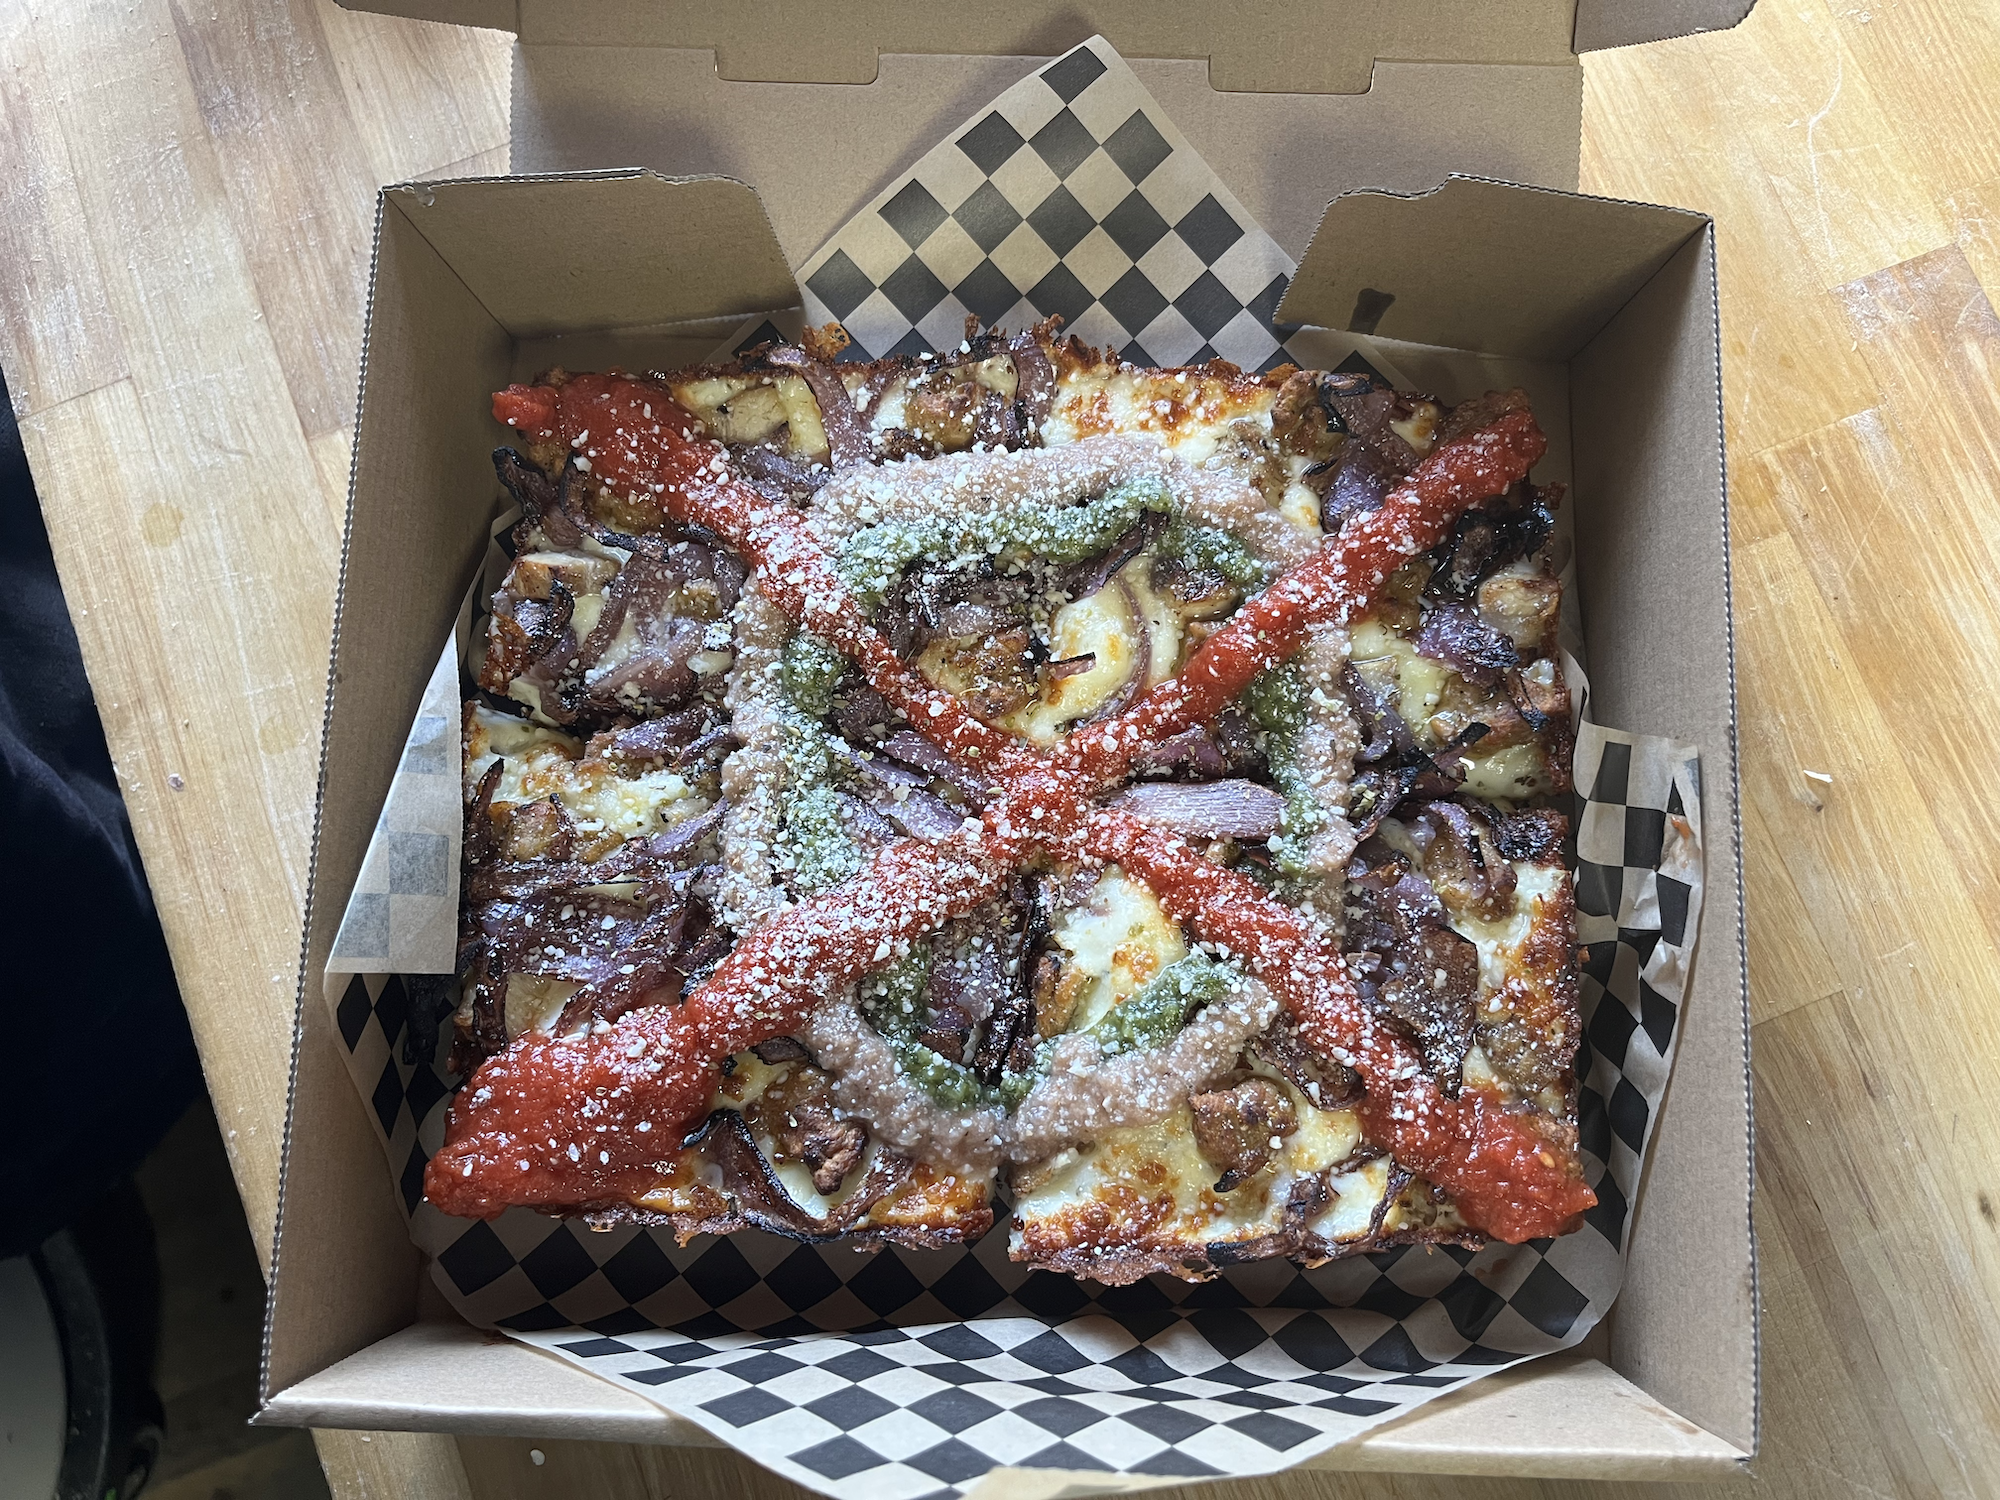 A Detroit-style pizza topped with several colorful sauces